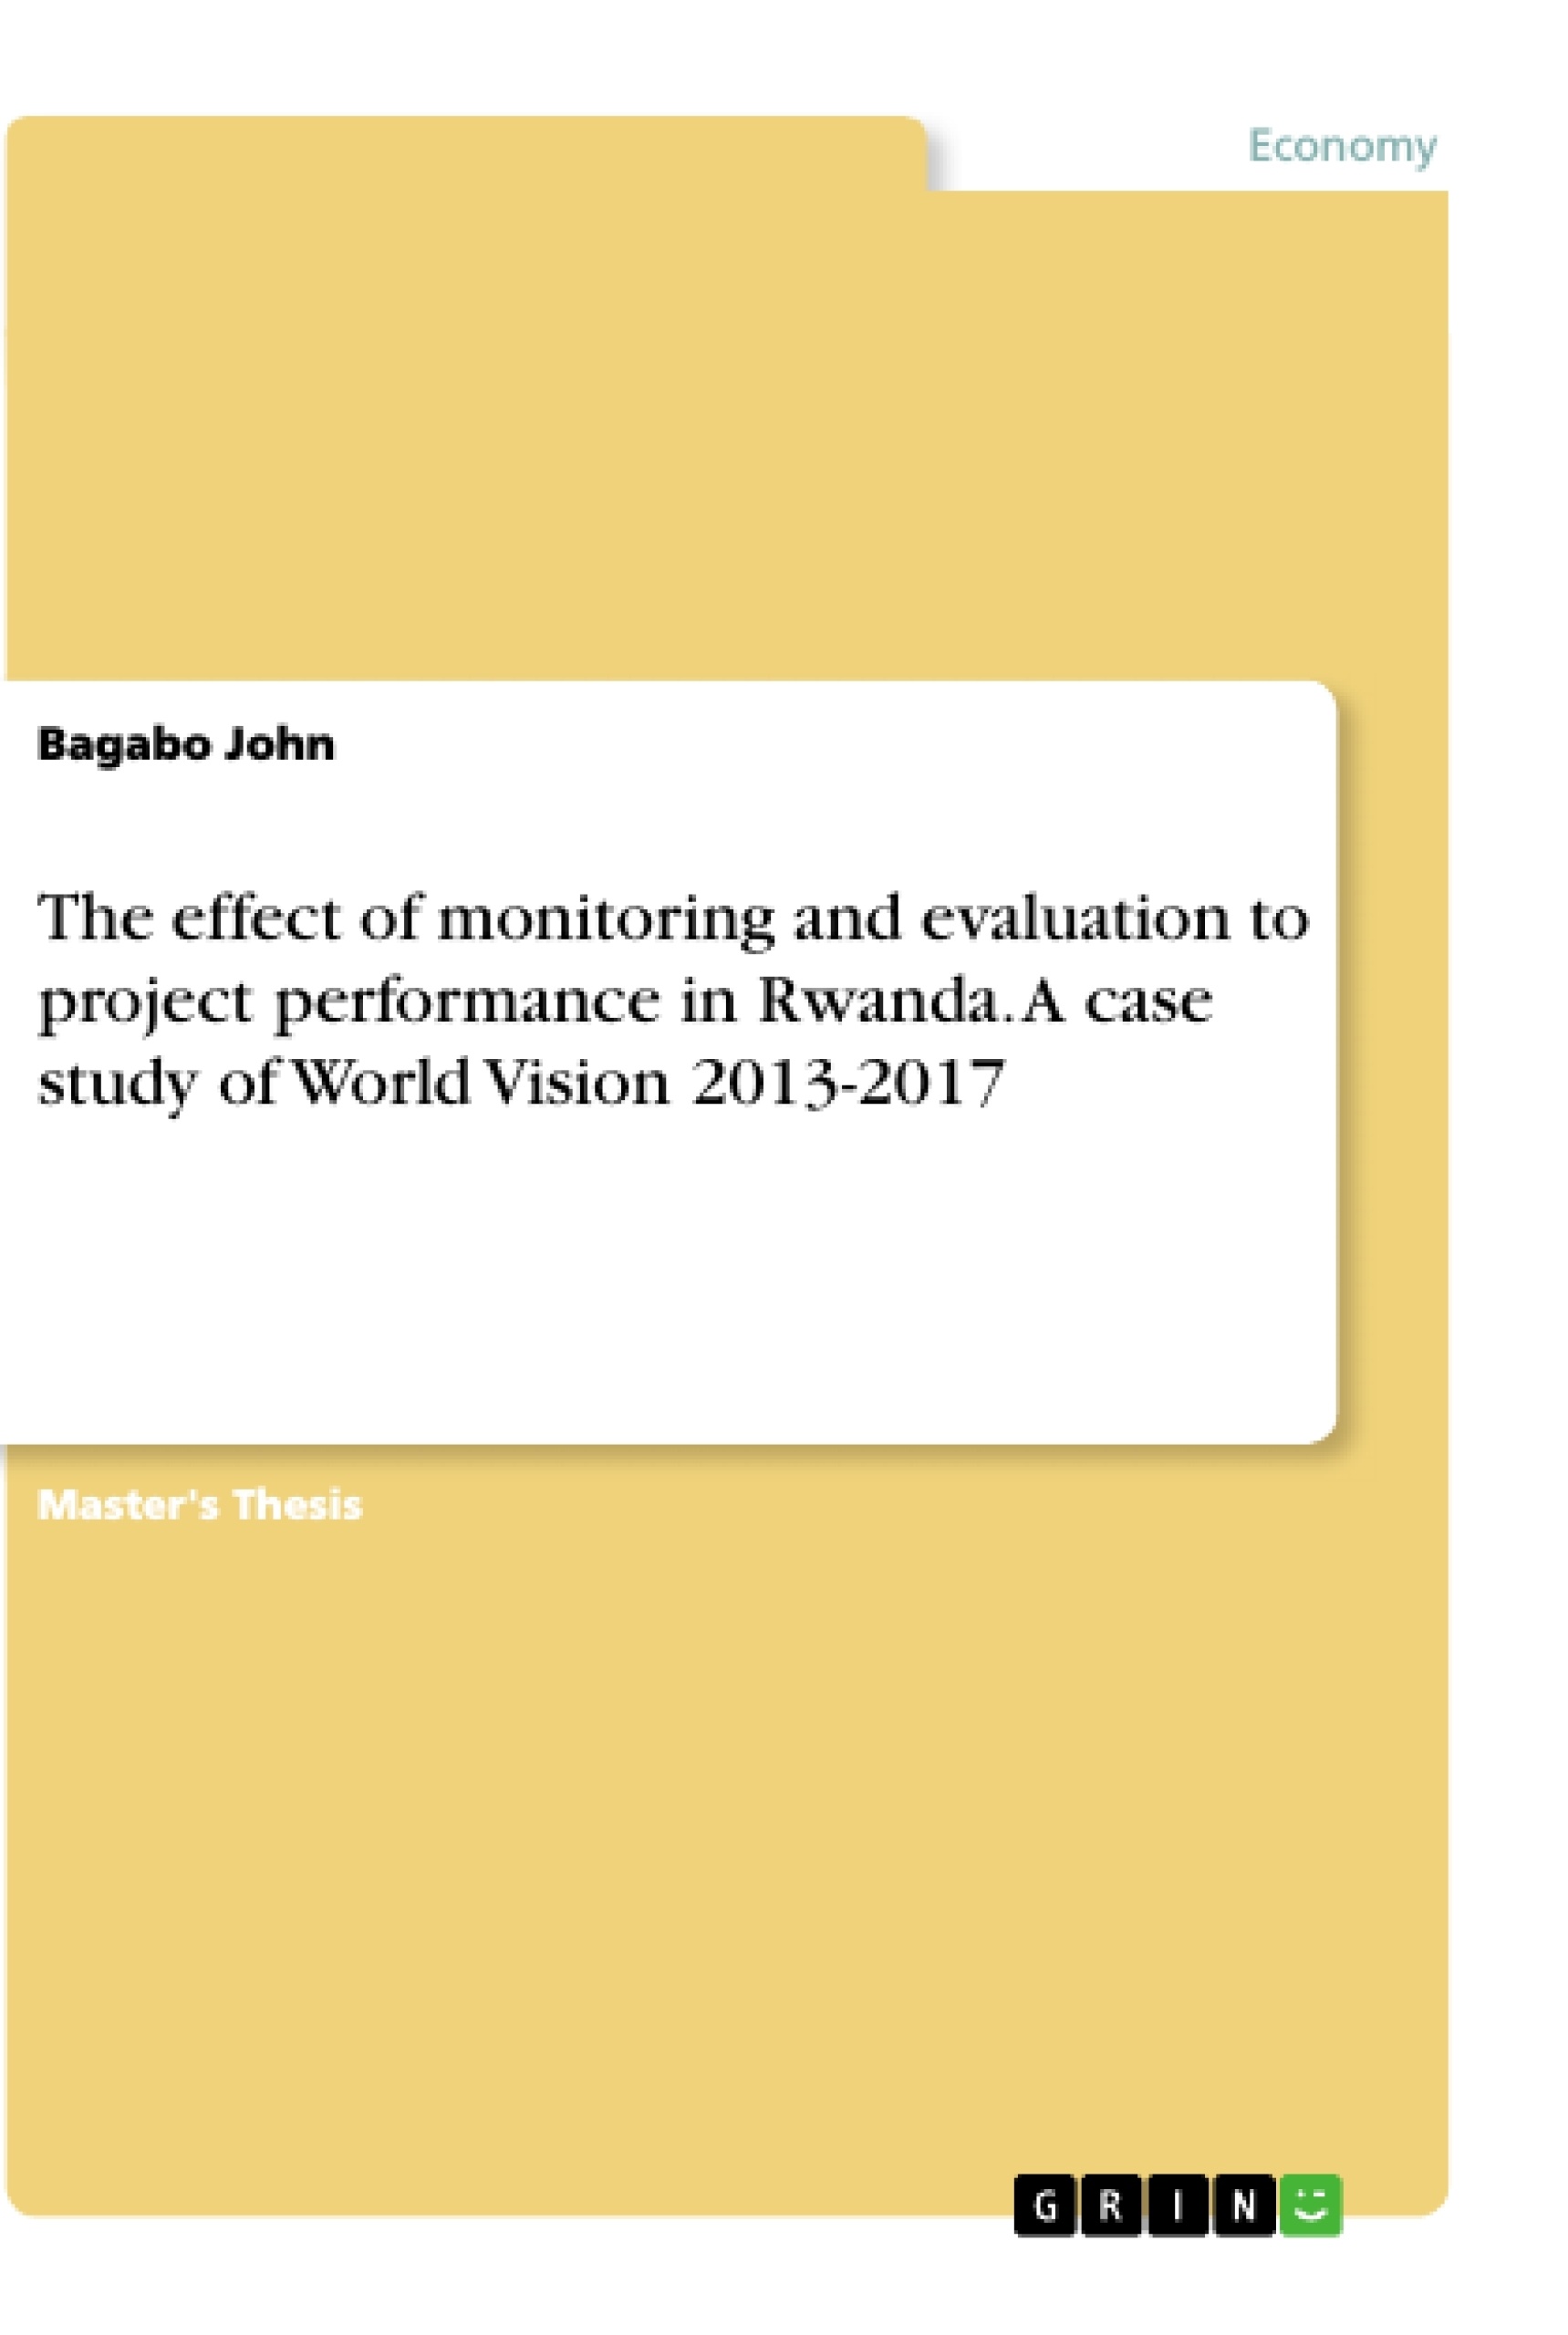 Title: The effect of monitoring and evaluation to project performance in Rwanda. A case study of World Vision 2013-2017